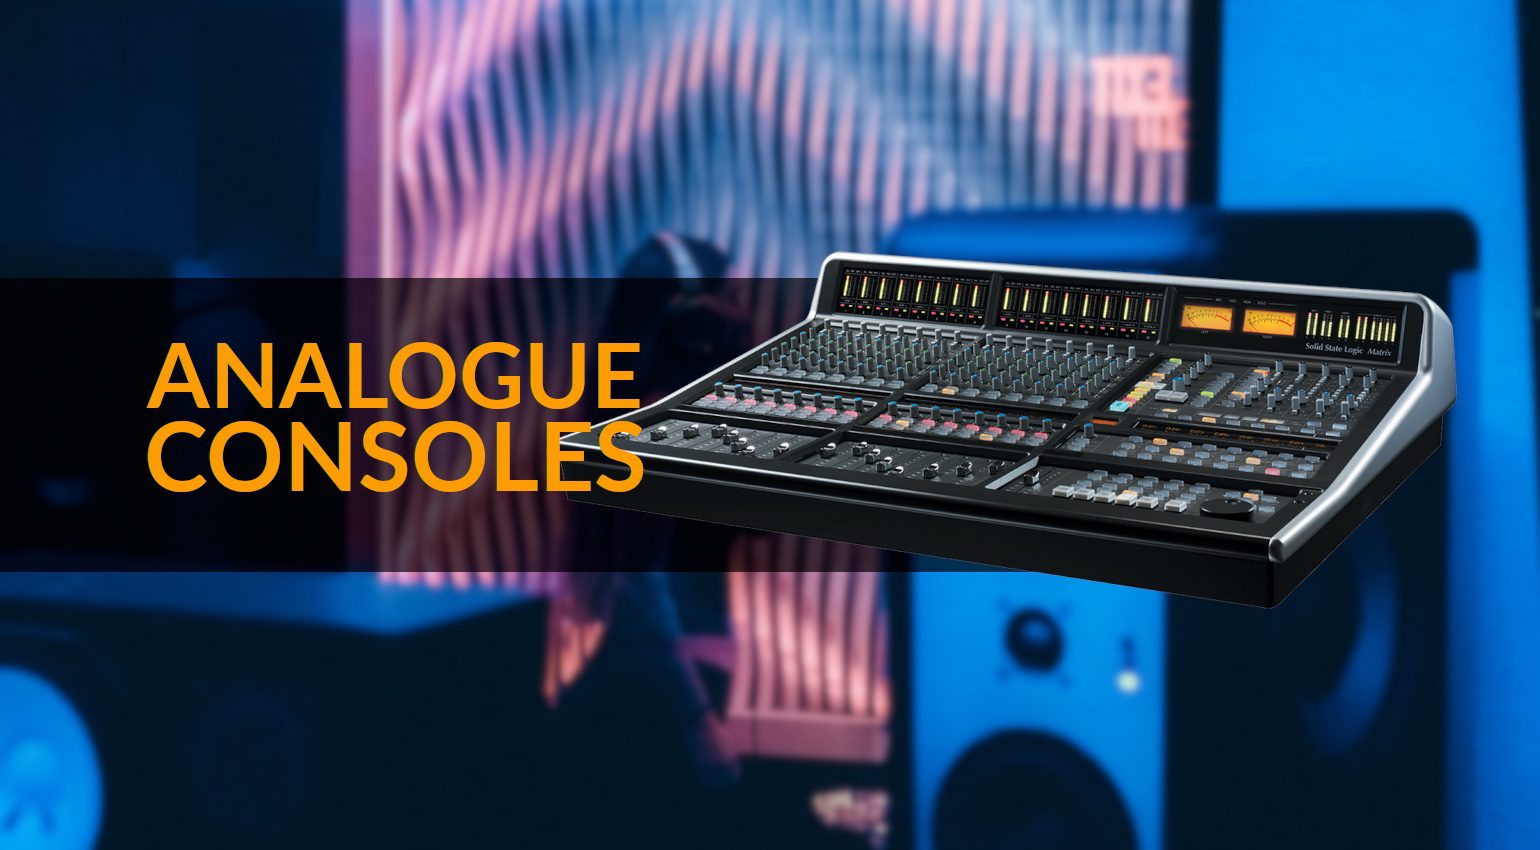 Looking to add some analogue gear to your studio setup? We've got